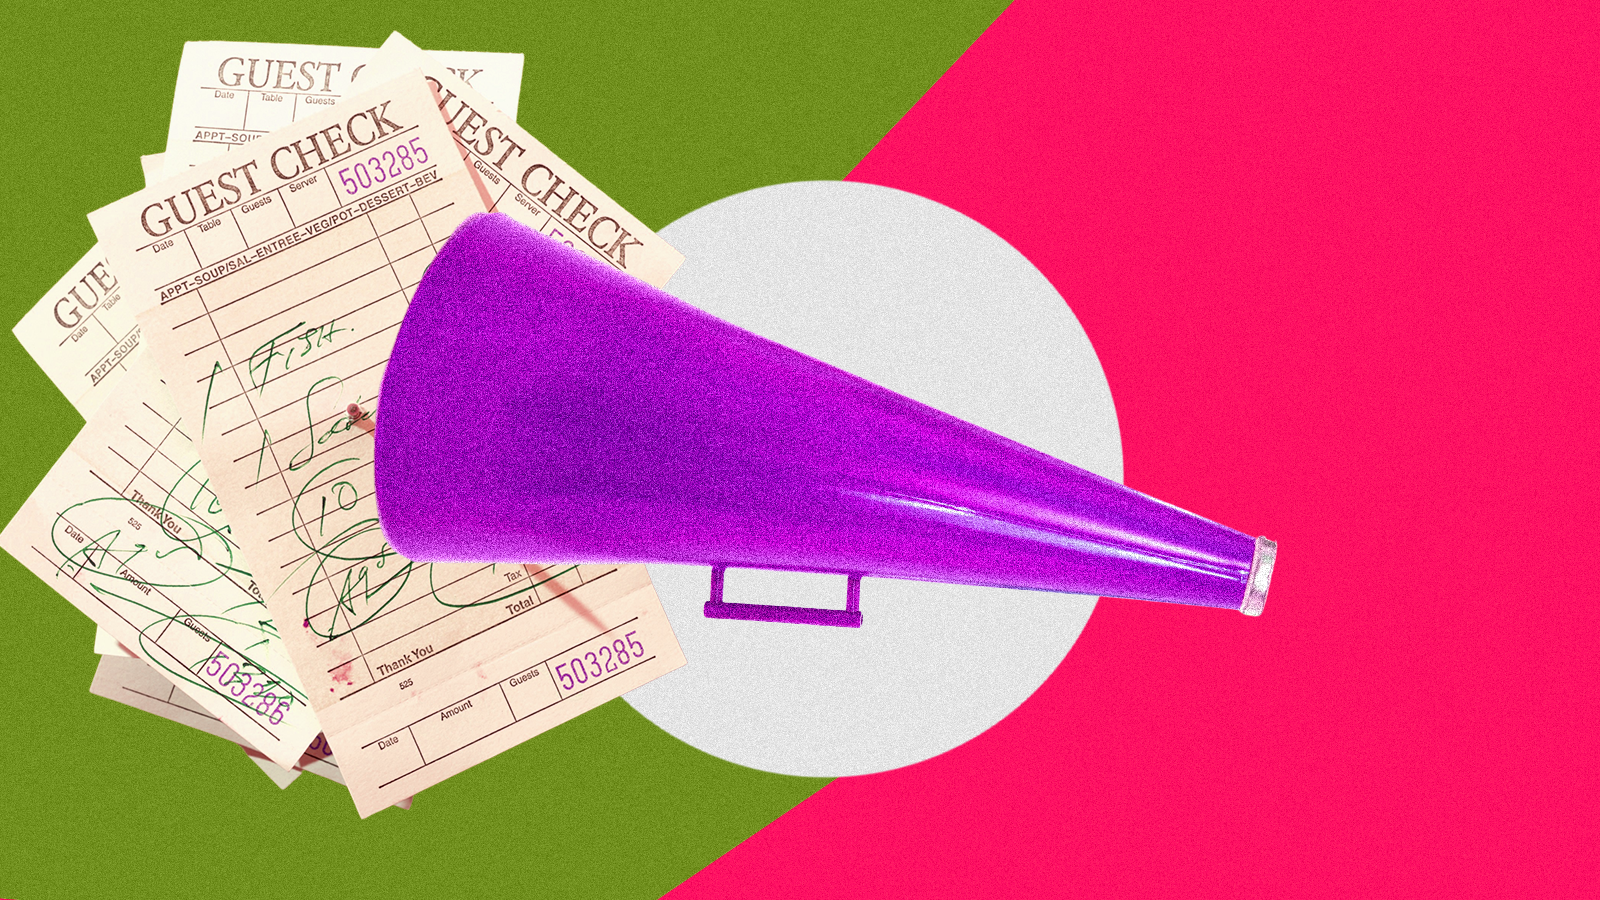 A collage of a megaphone and restaurant checks.